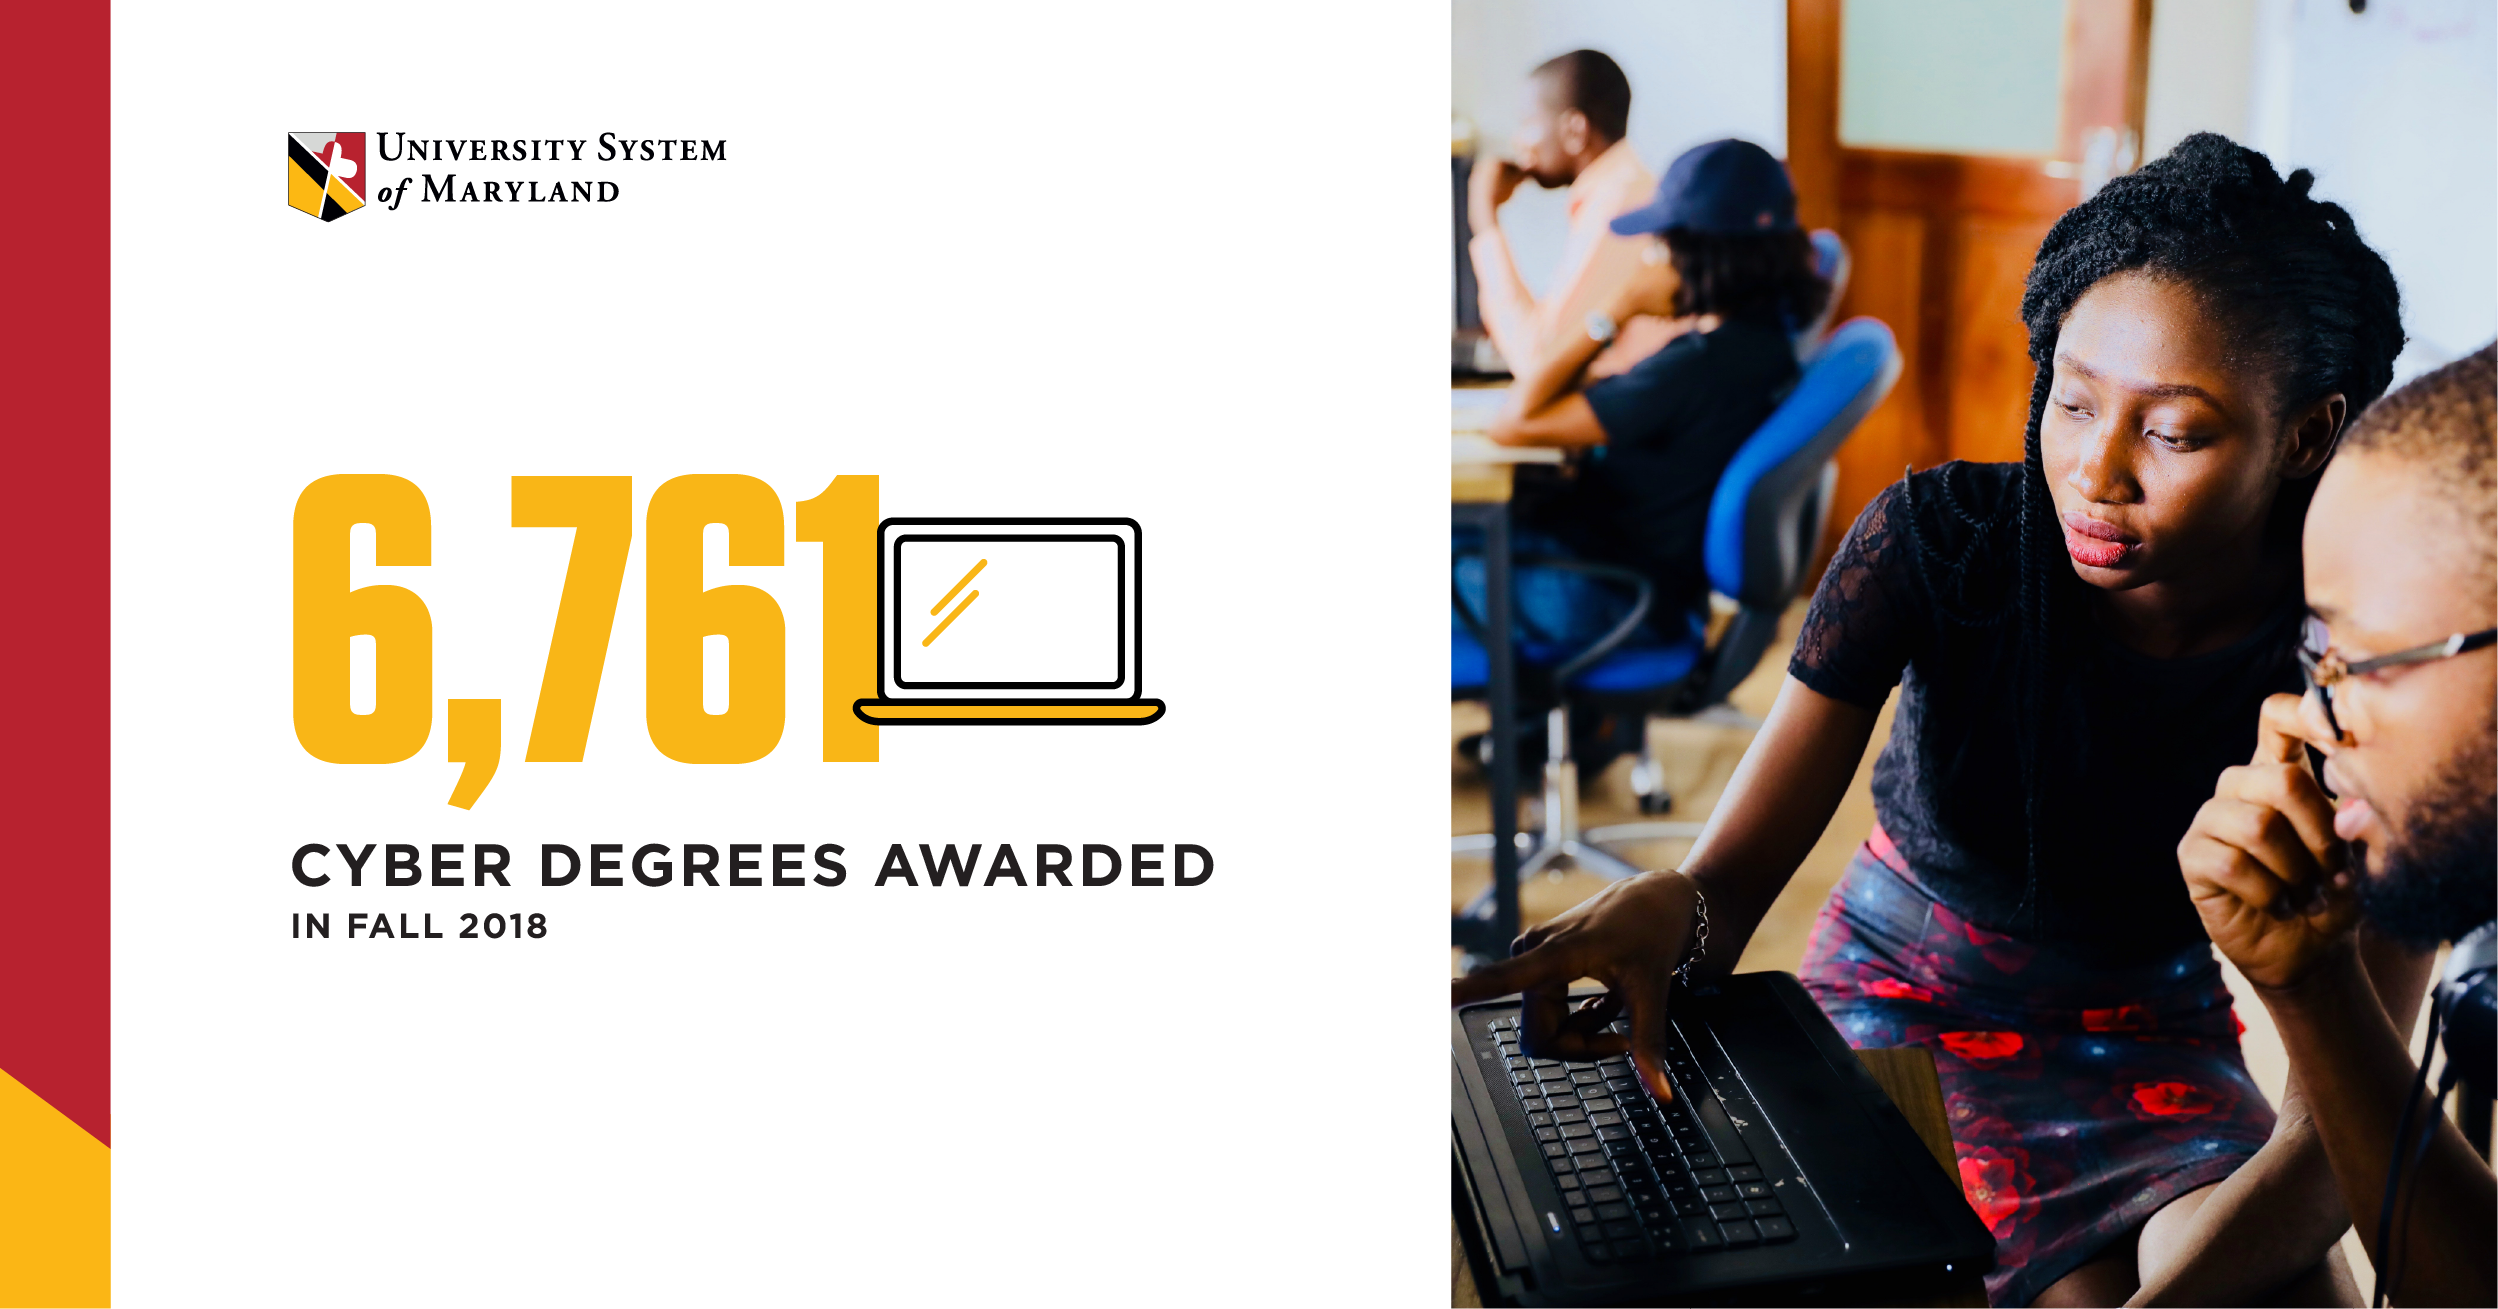 6,761 Cyber Degrees Awarded in FY 2018